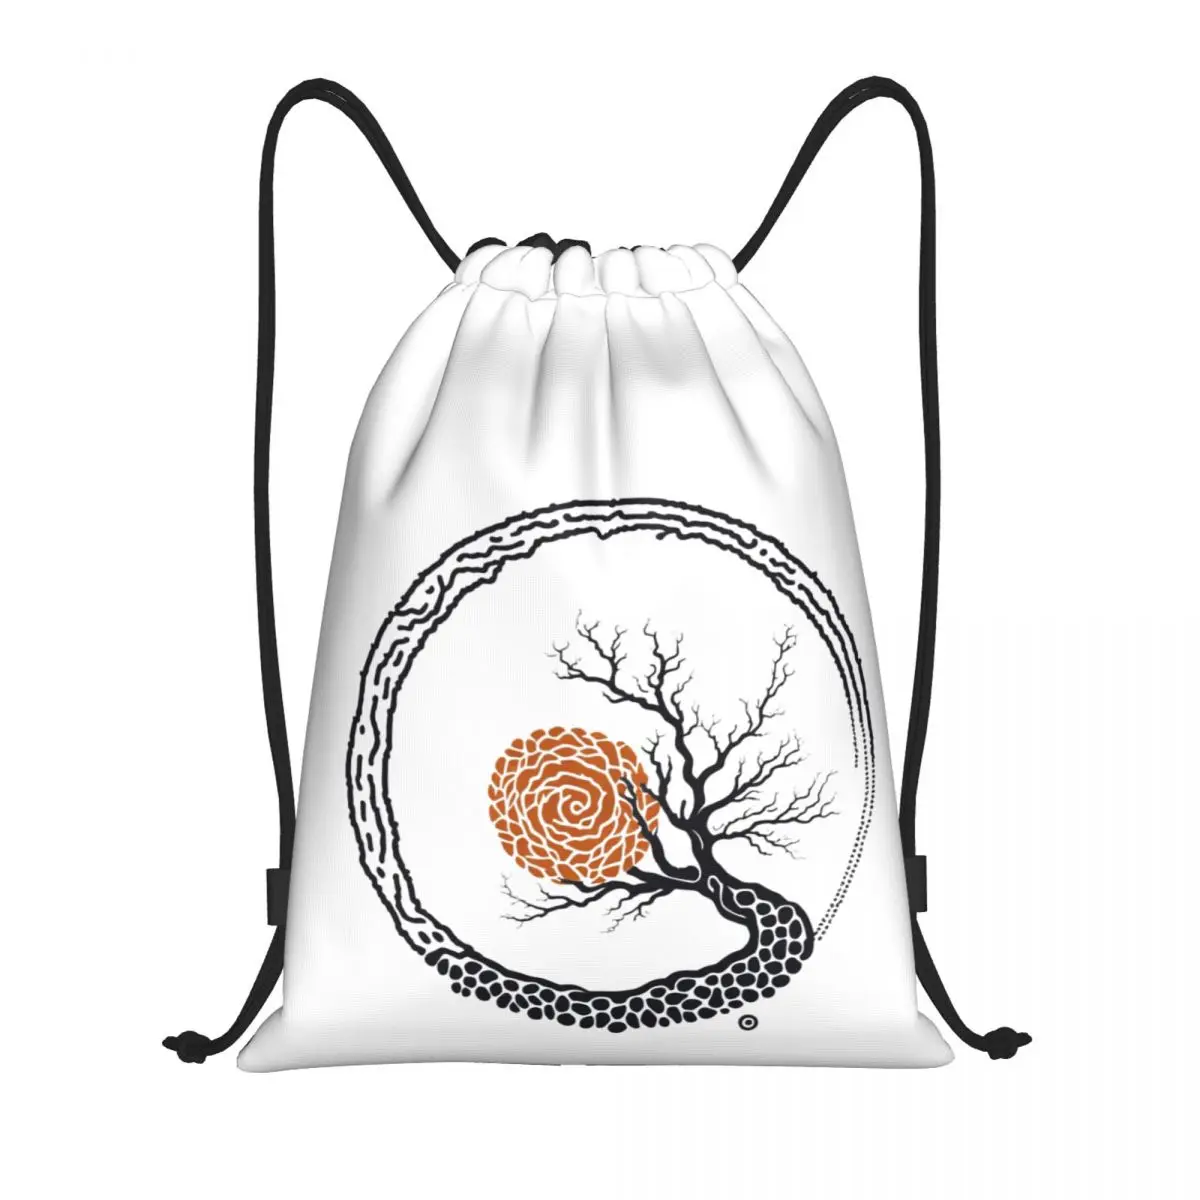 

Enso Circle And Bonsai 5 Drawstring Bags Gym Bag Graphic Cool Backpack Humor Graphic Infantry pack Firm Korean style